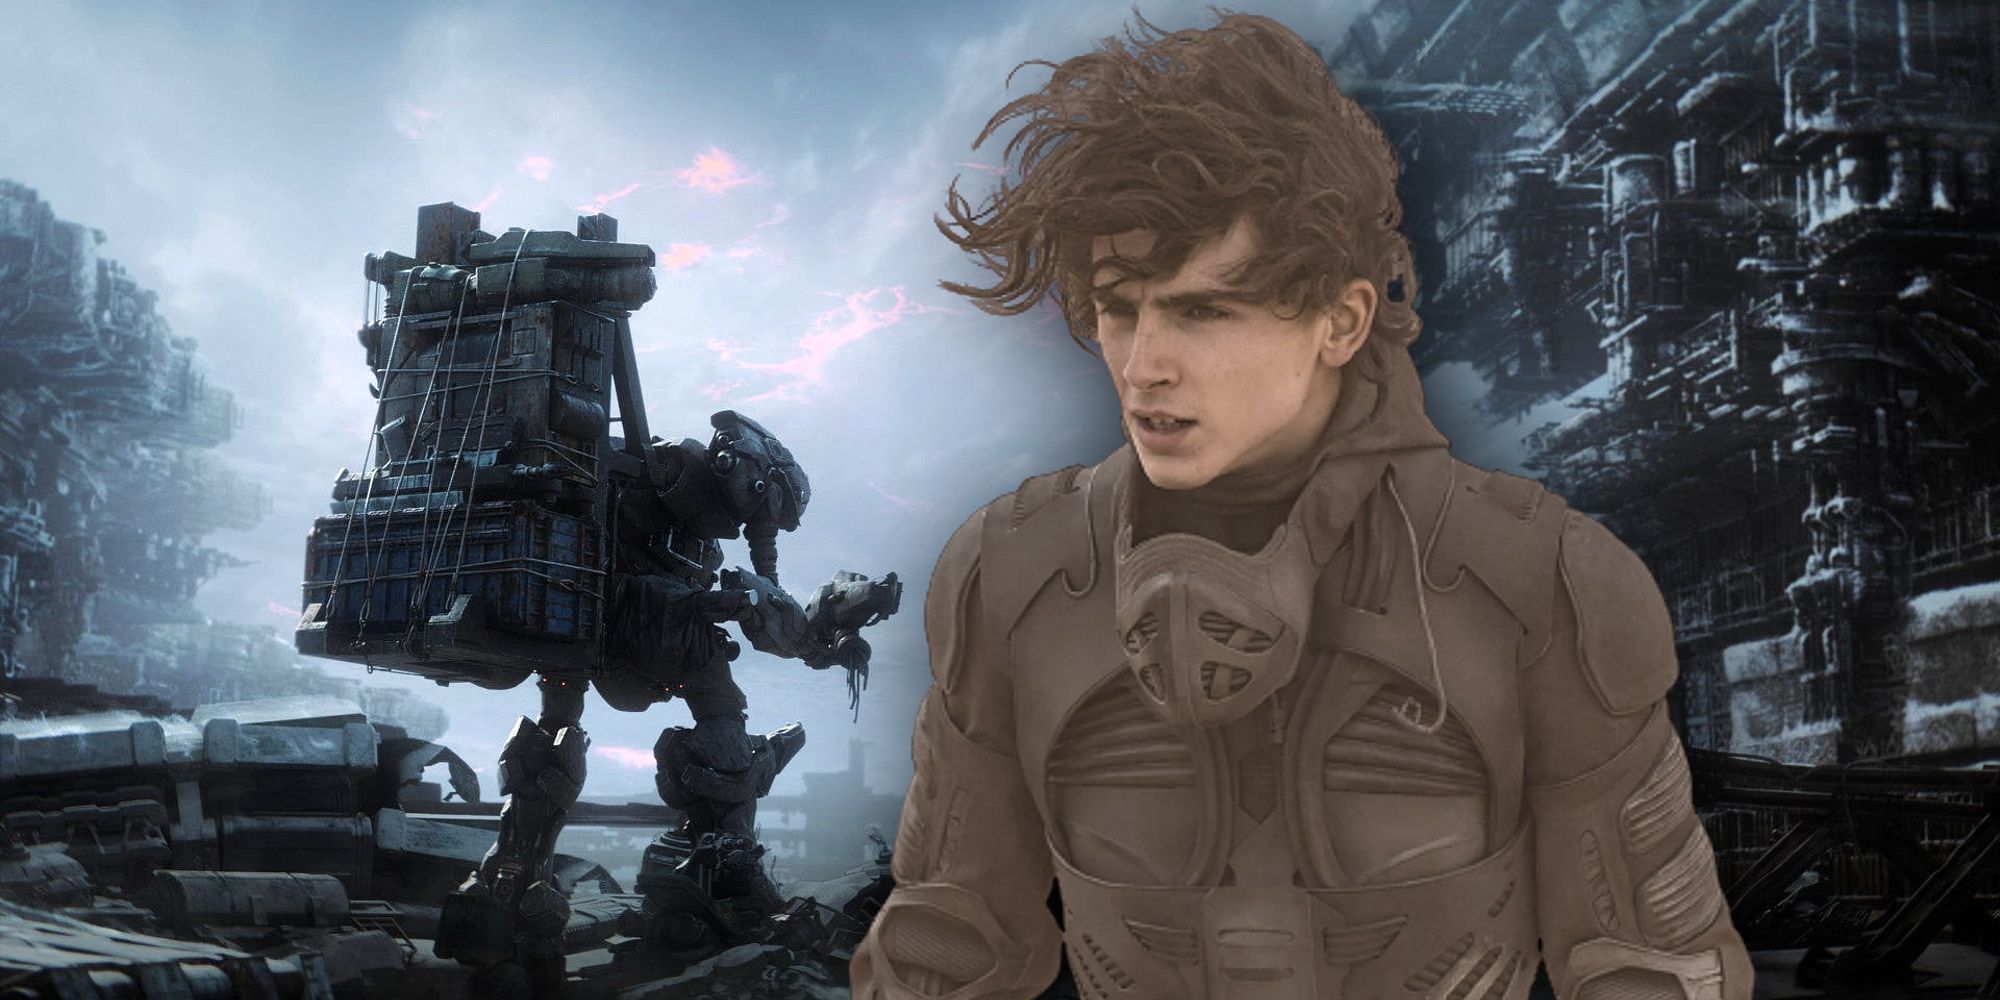 Image of a mech from Armored 6 pictured next to Dune's Paul Atreides.